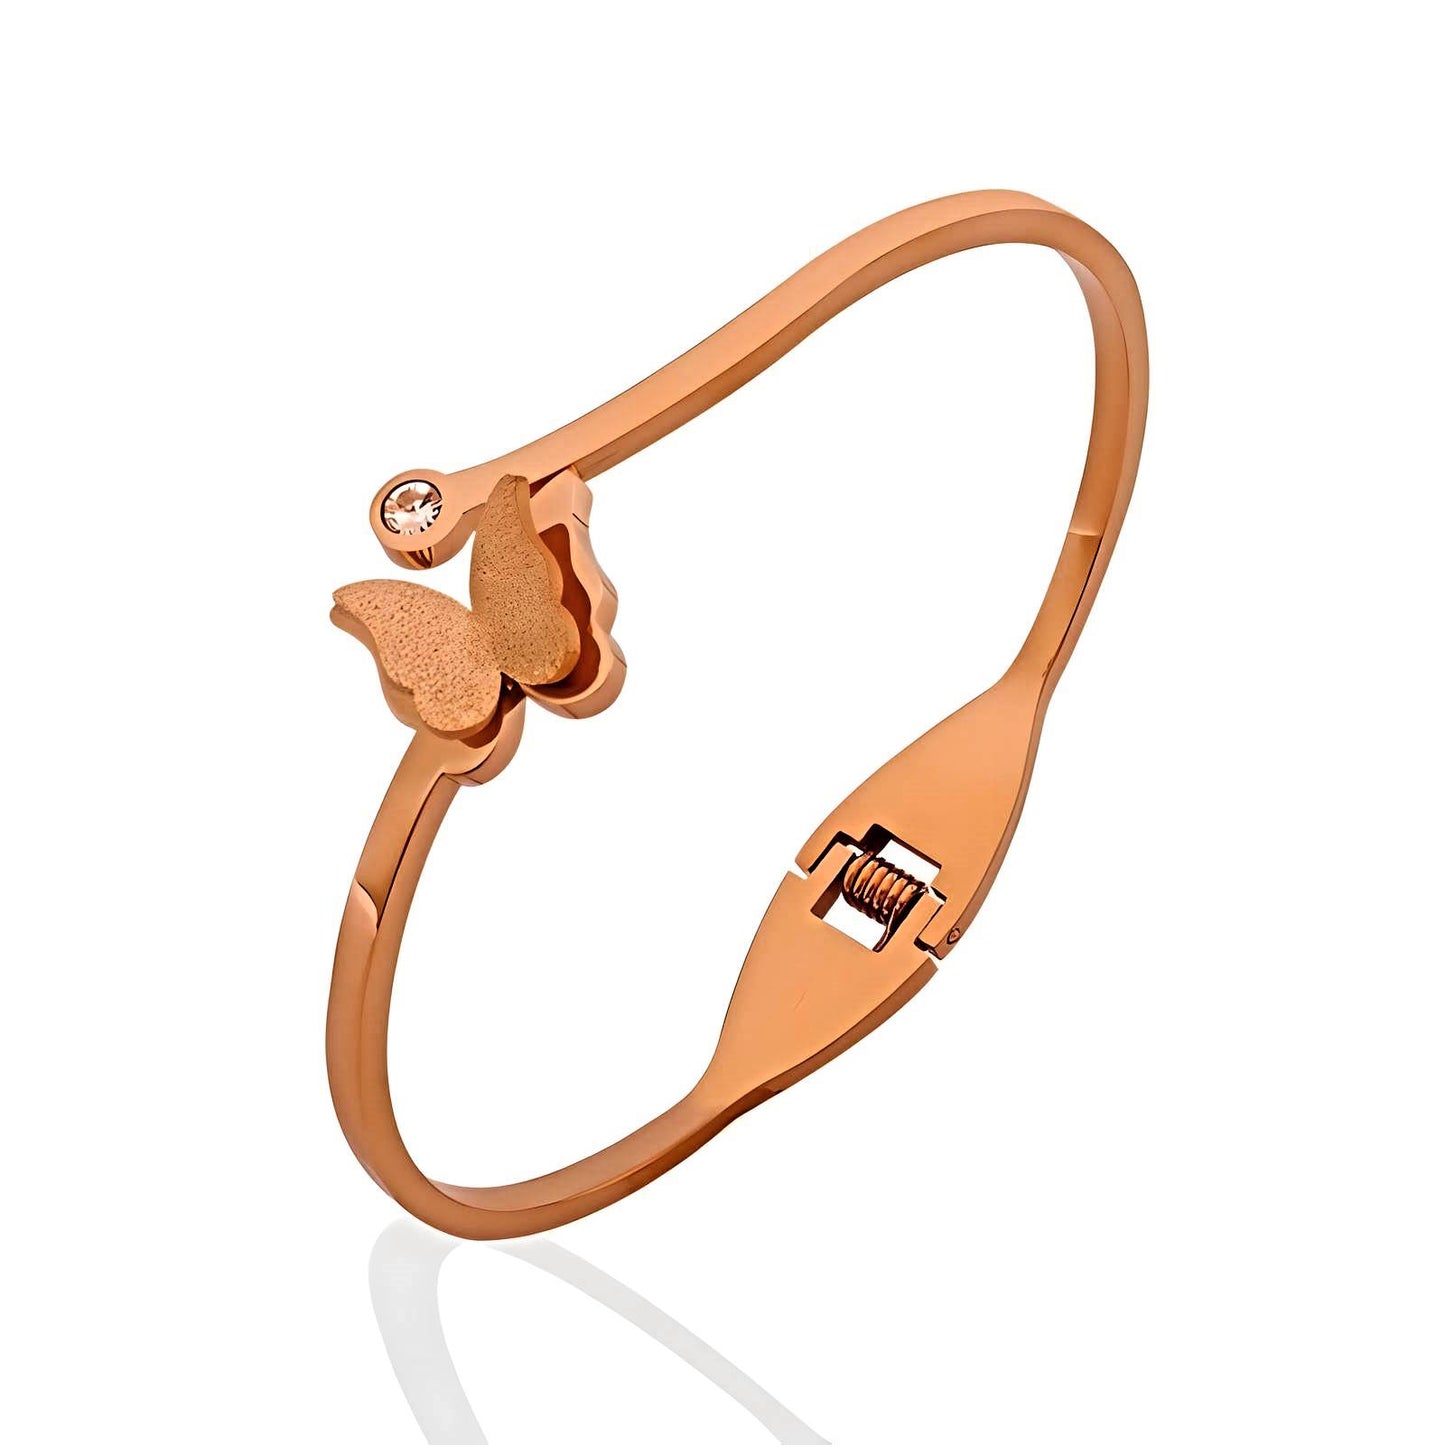 Fly with me butterfly bracelet - rose gold